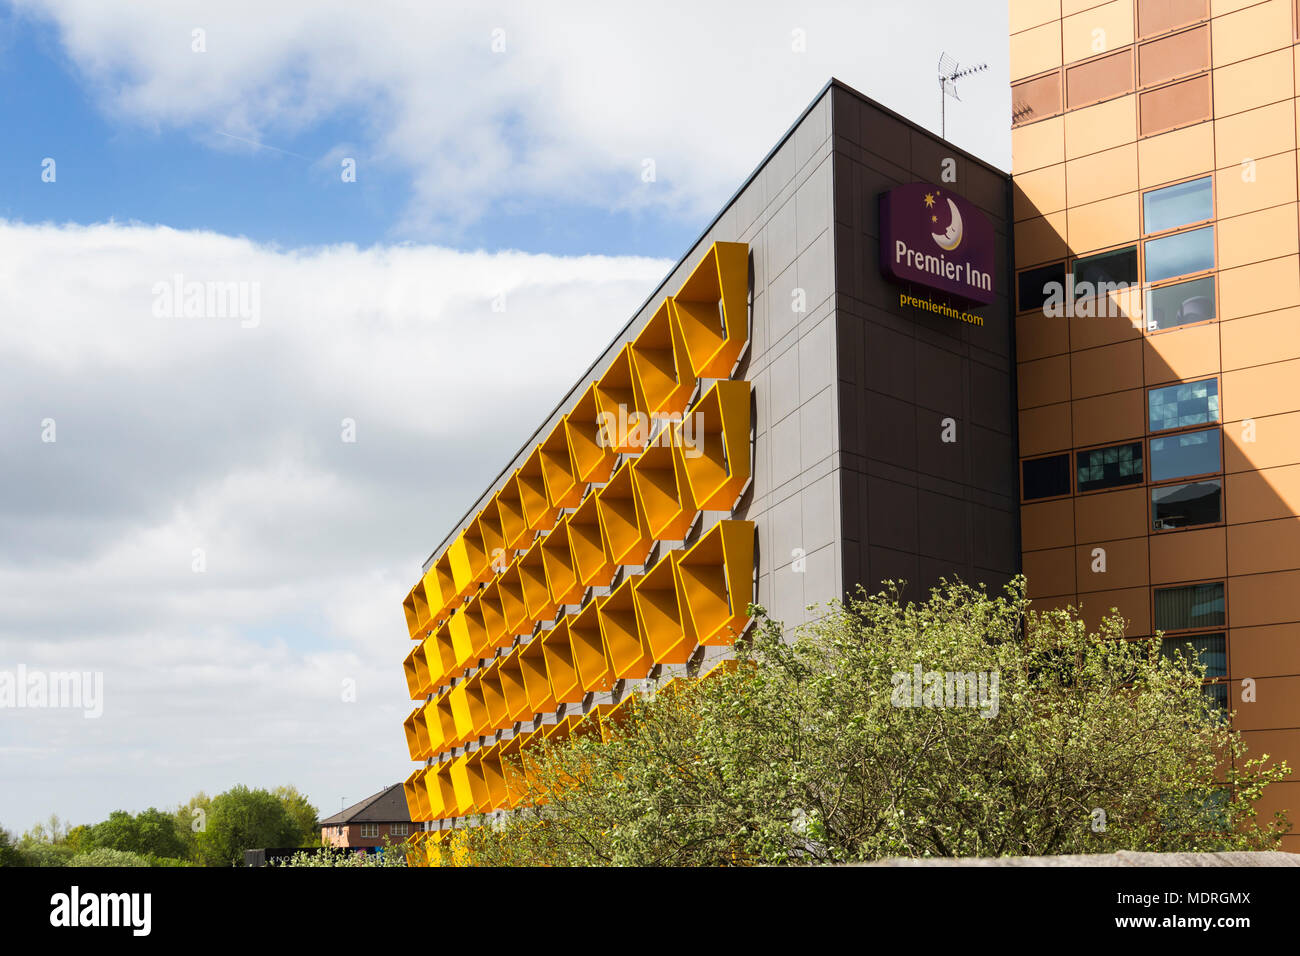 Premier Inn hotel building, Angeloume Way/ Bury. Completed in 2011, designed to maximise natural inside but minimise solar overheating. Stock Photo